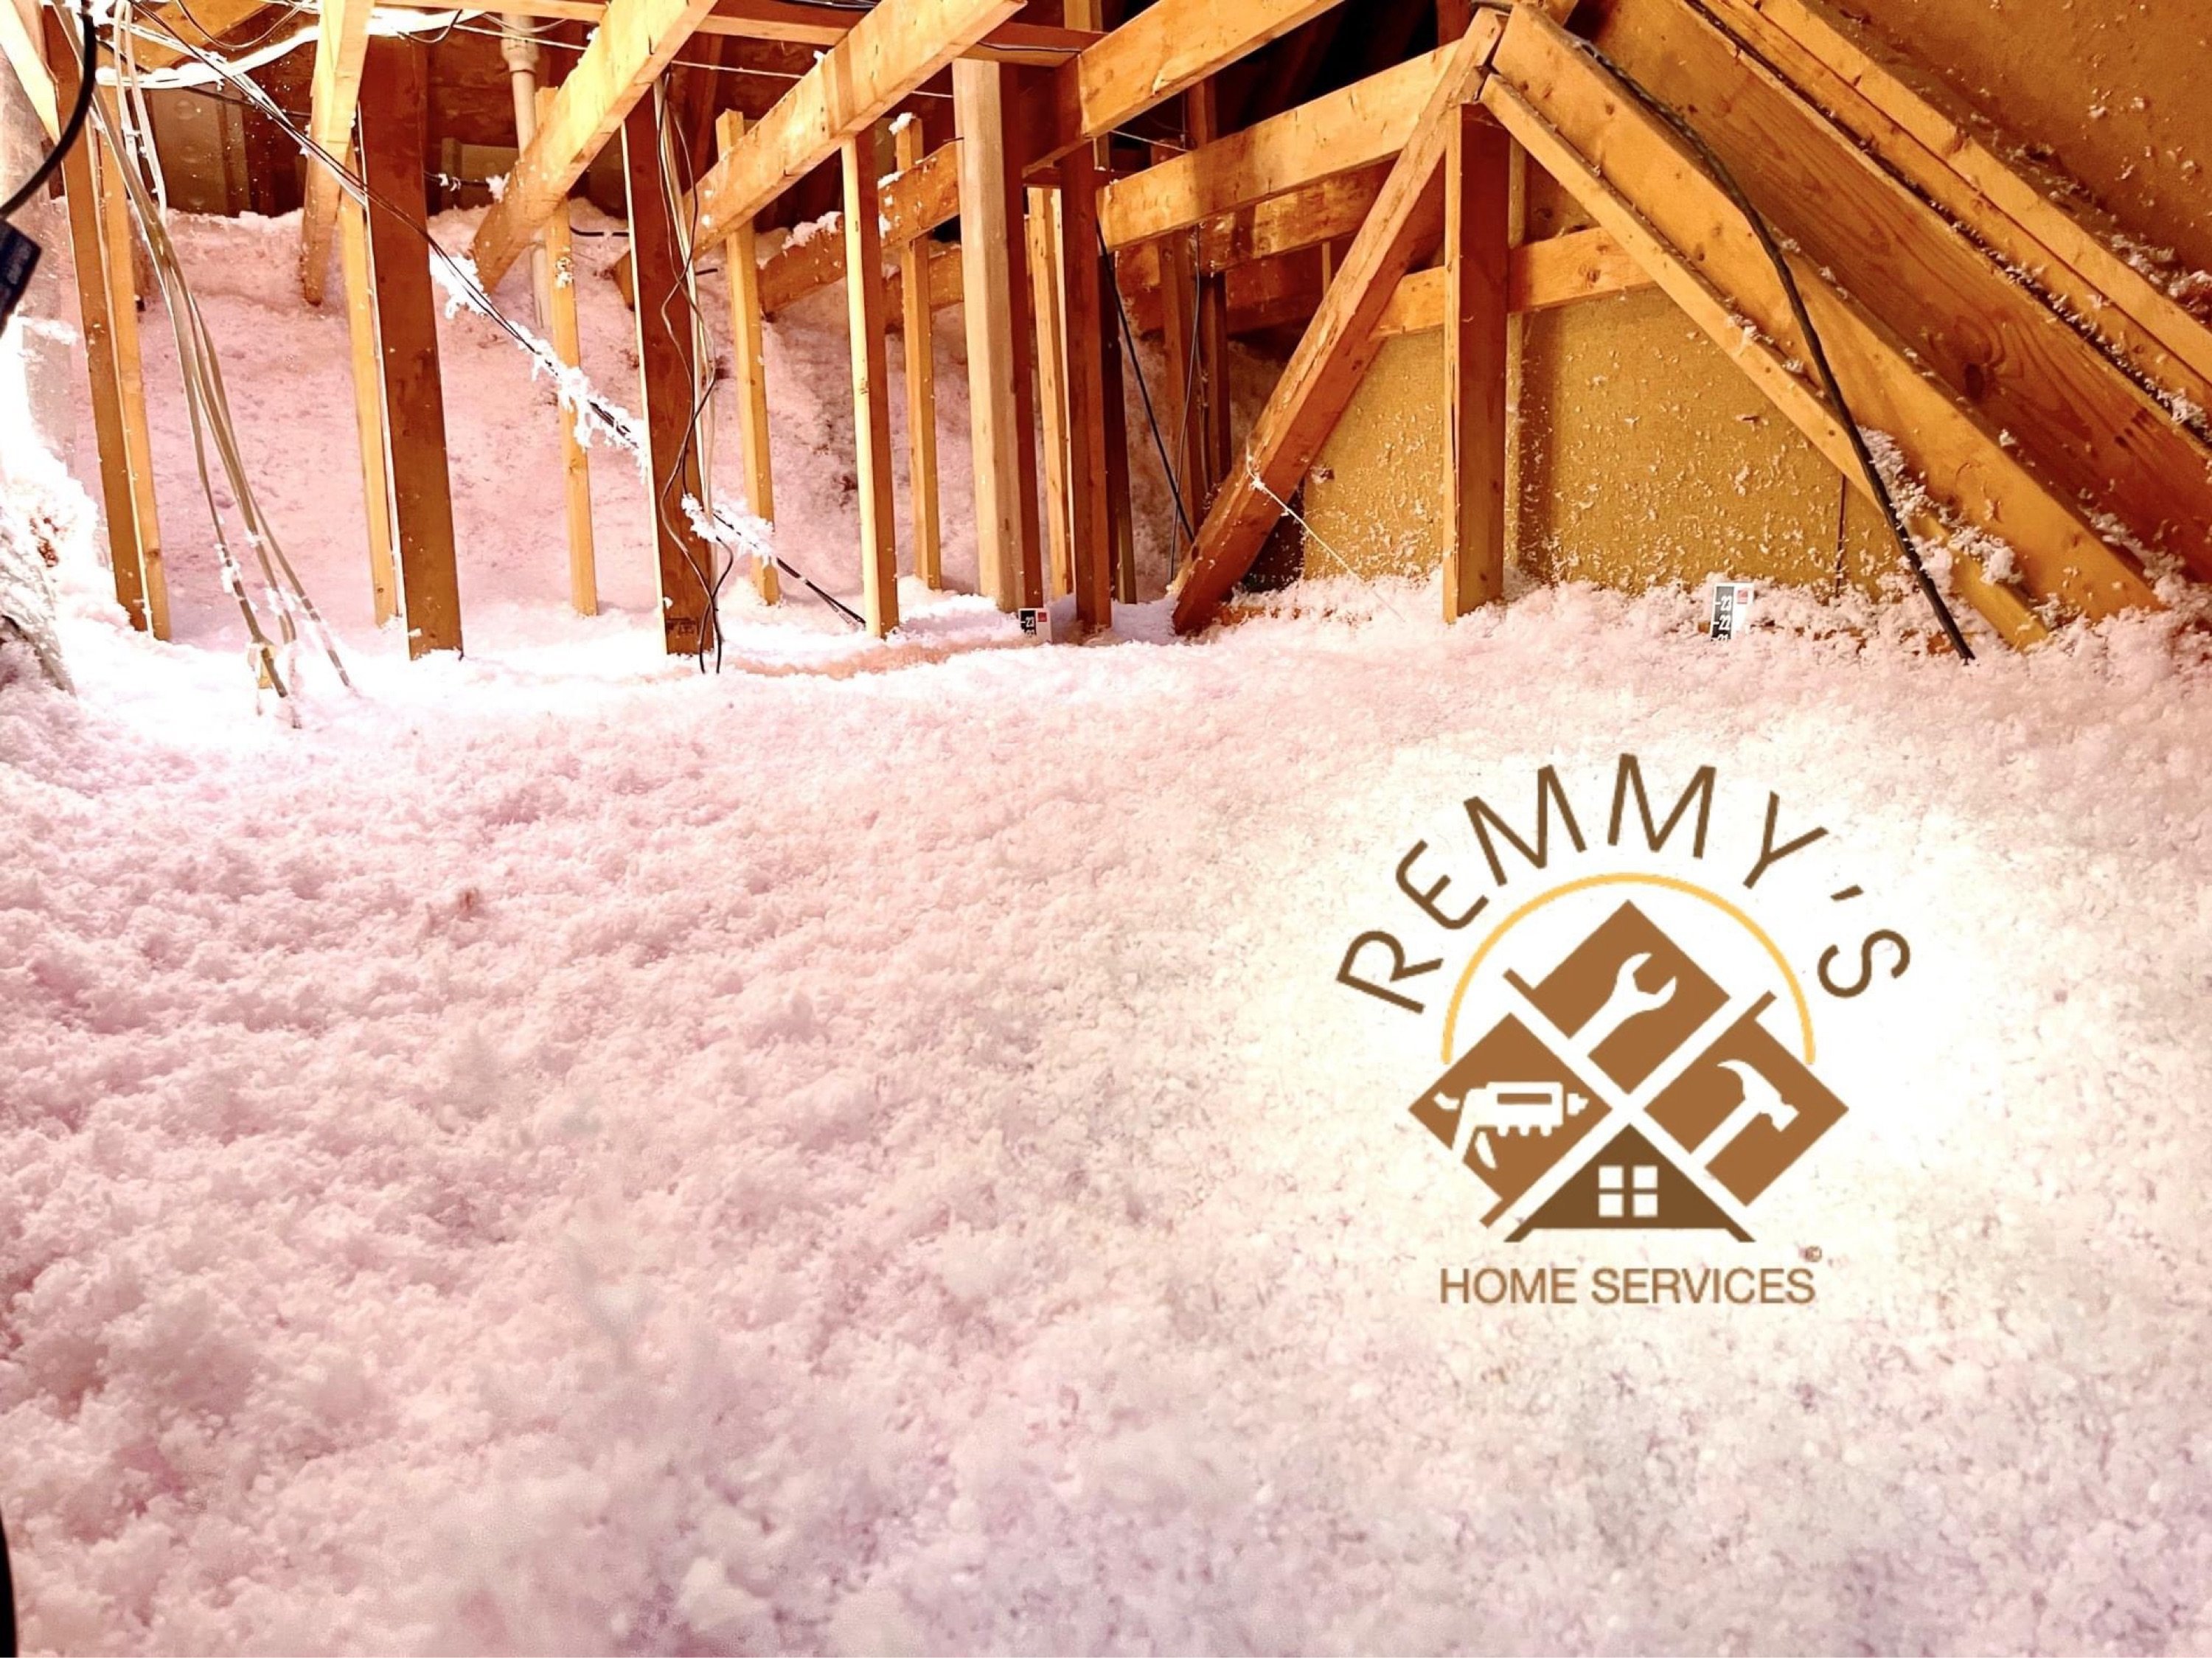 Remmy's Home Services Logo